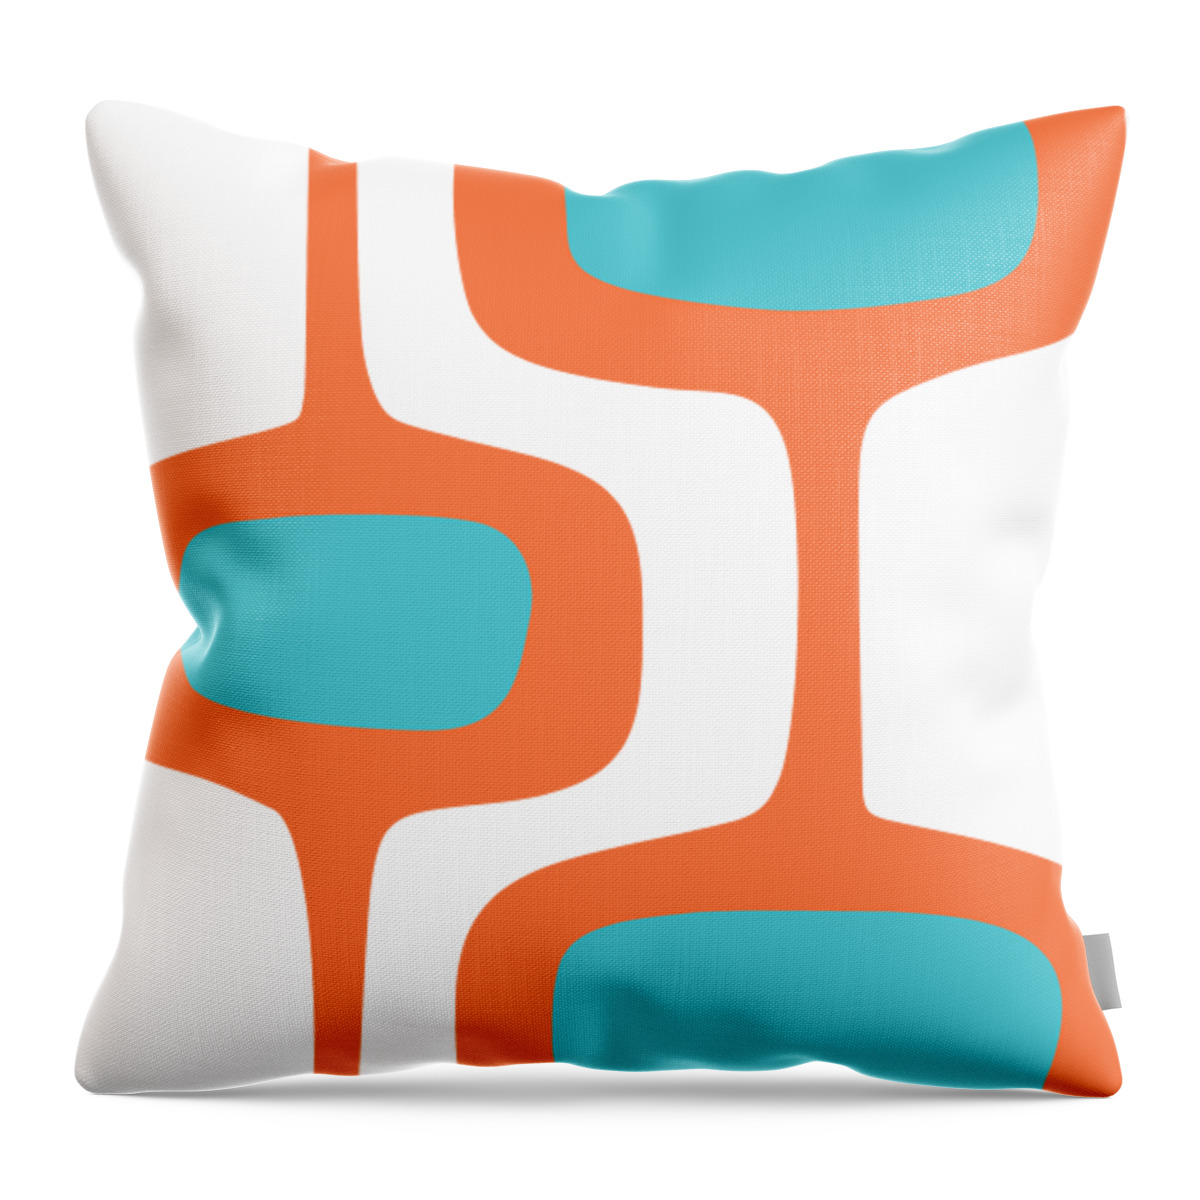  Throw Pillow featuring the digital art Mod Pod Two in Turquoise and Orange by Donna Mibus